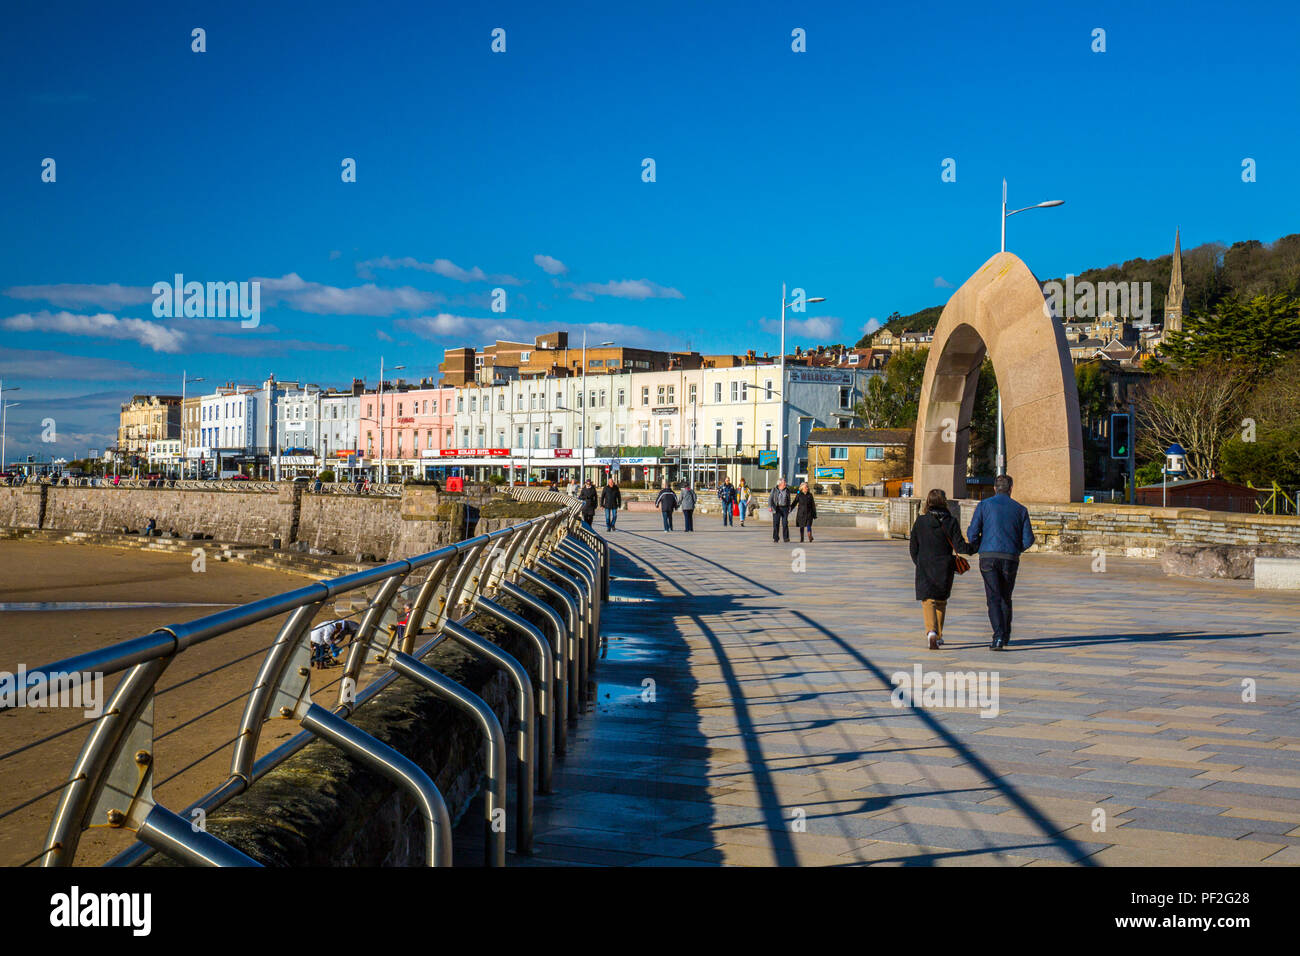 A granite archway and seafront hotels on the promenade in winter at Weston-super-Mare, North Somerset, England, UK Stock Photo